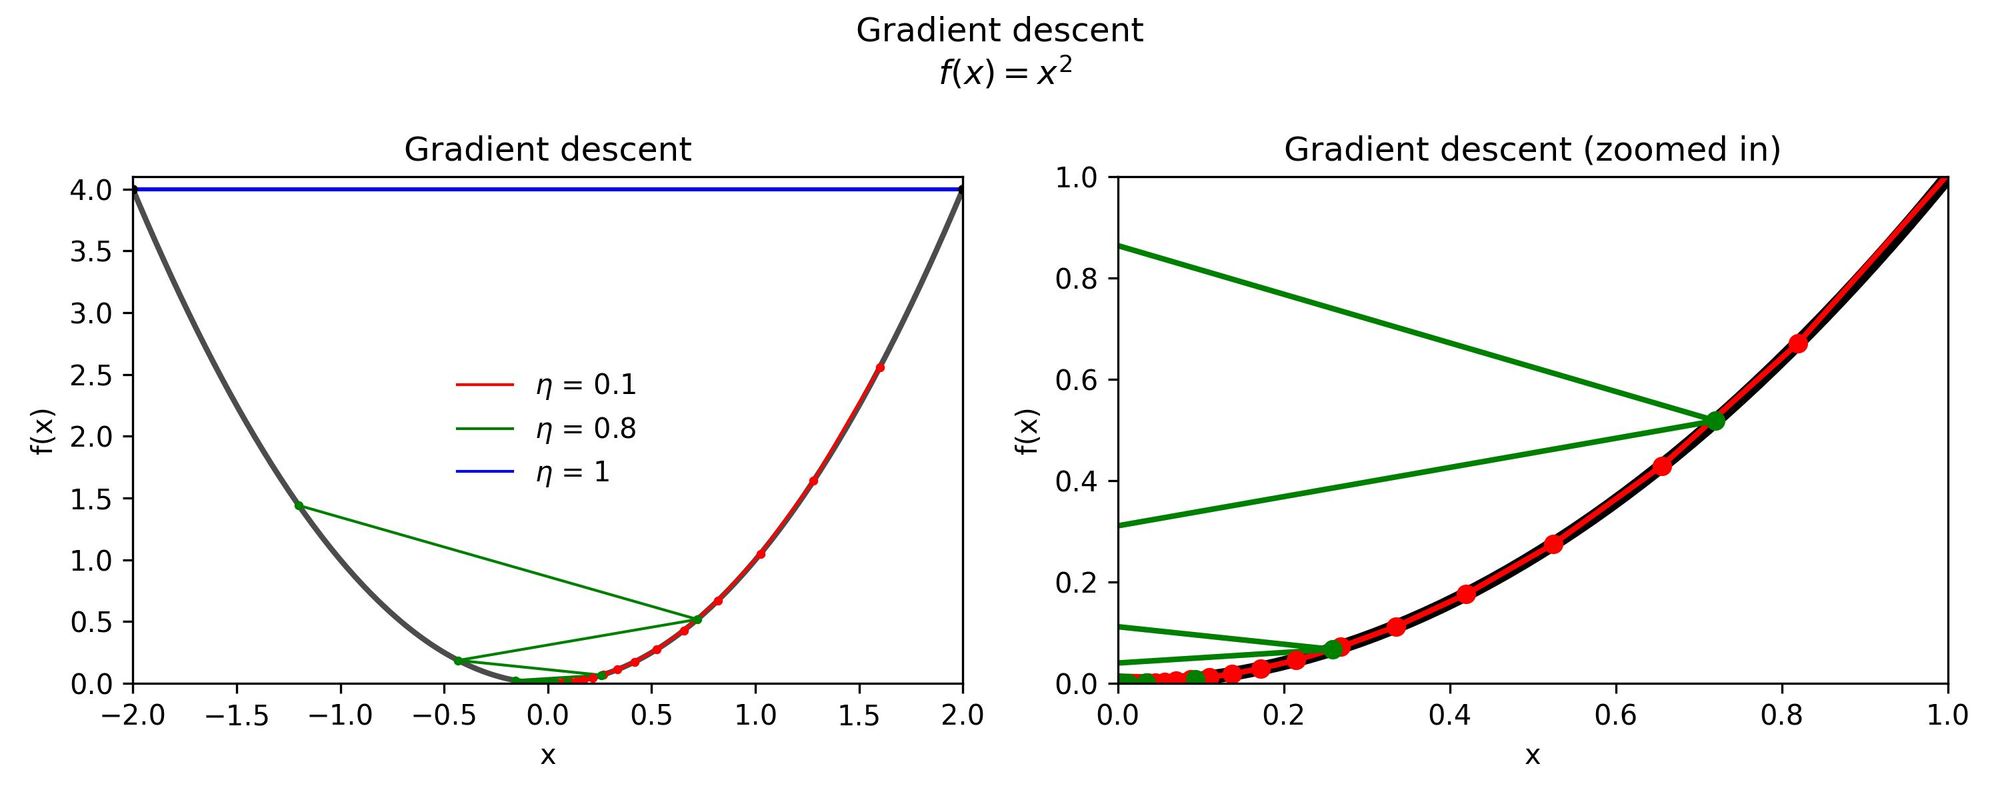 Example of stochastic gradient descent applied to $f(x) = x^2$ with different step sizes. In all cases, the algorithm is initialized at x = 2. Image by the author, with base code adapted from Saraj Rival’s notebook.